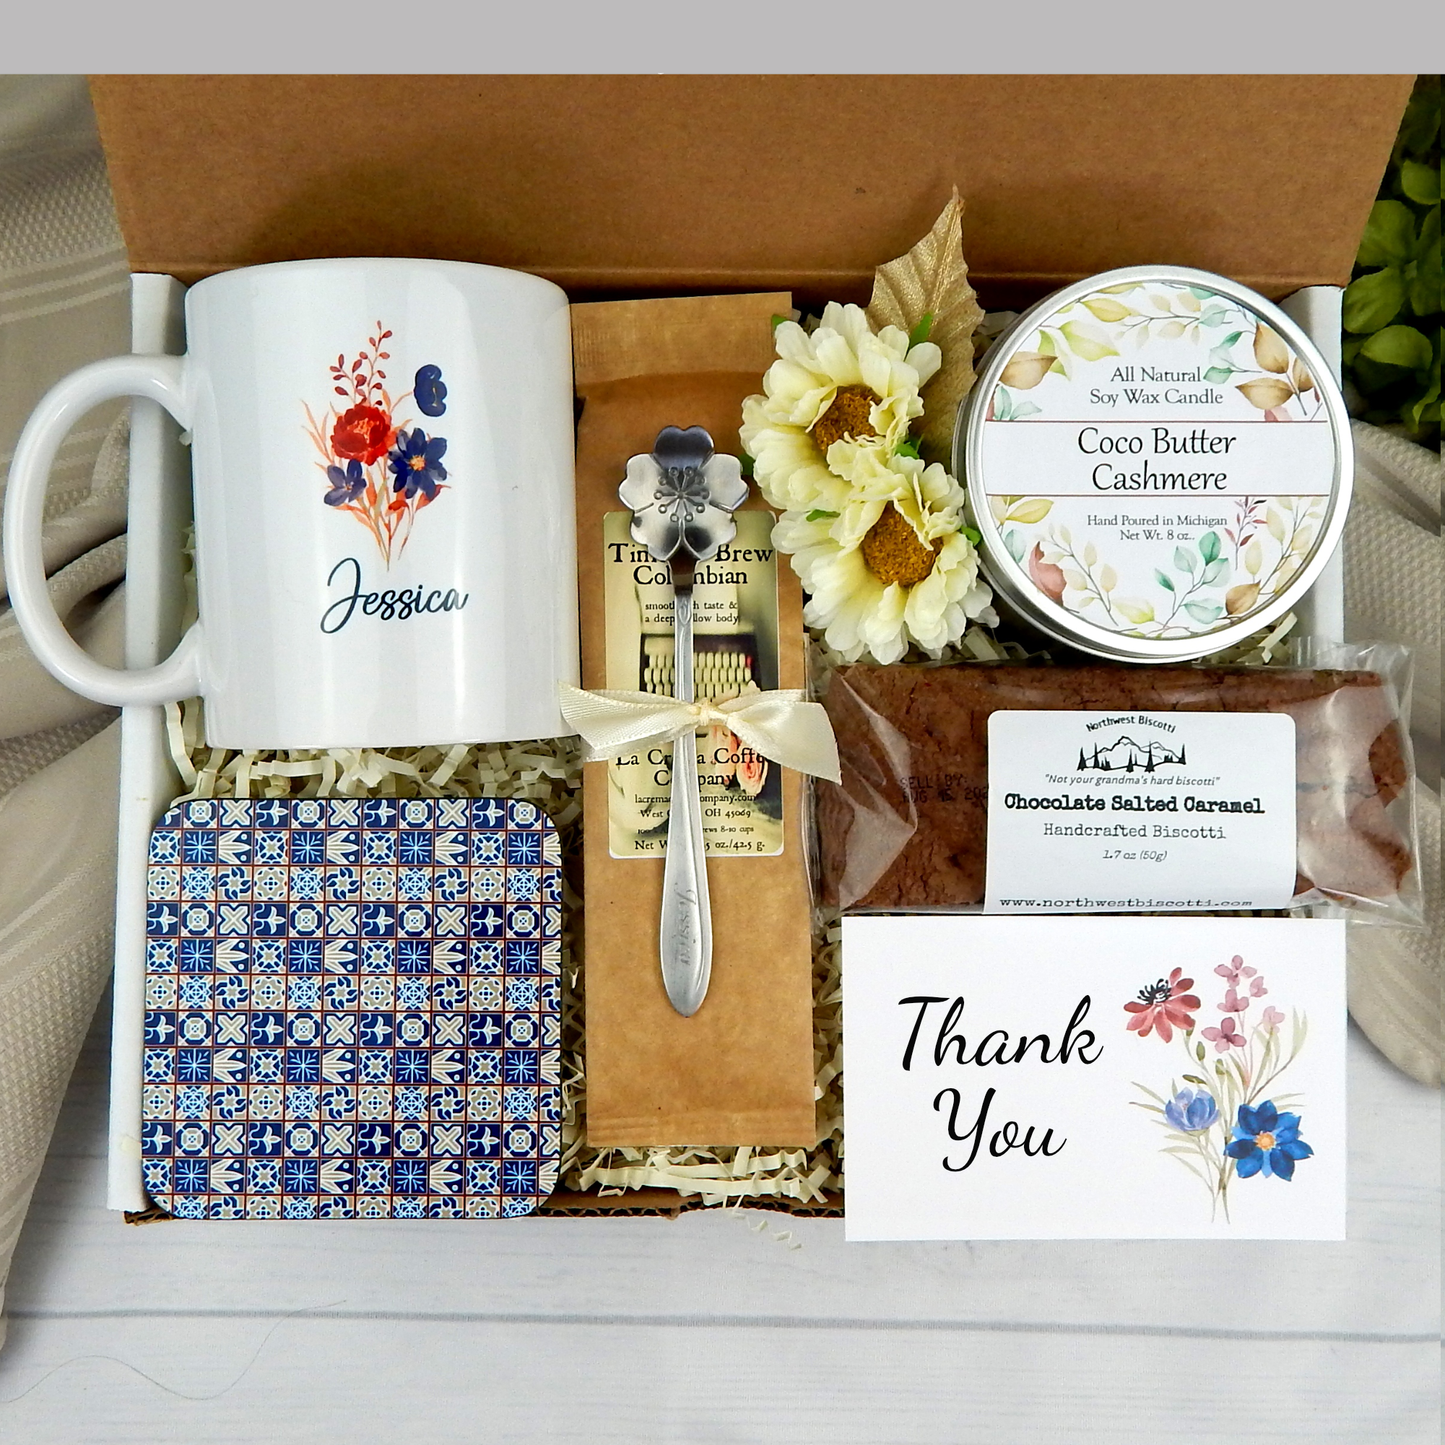 Expressing gratitude: Women's appreciation gift basket with customized mug, coffee, and delightful goodies.